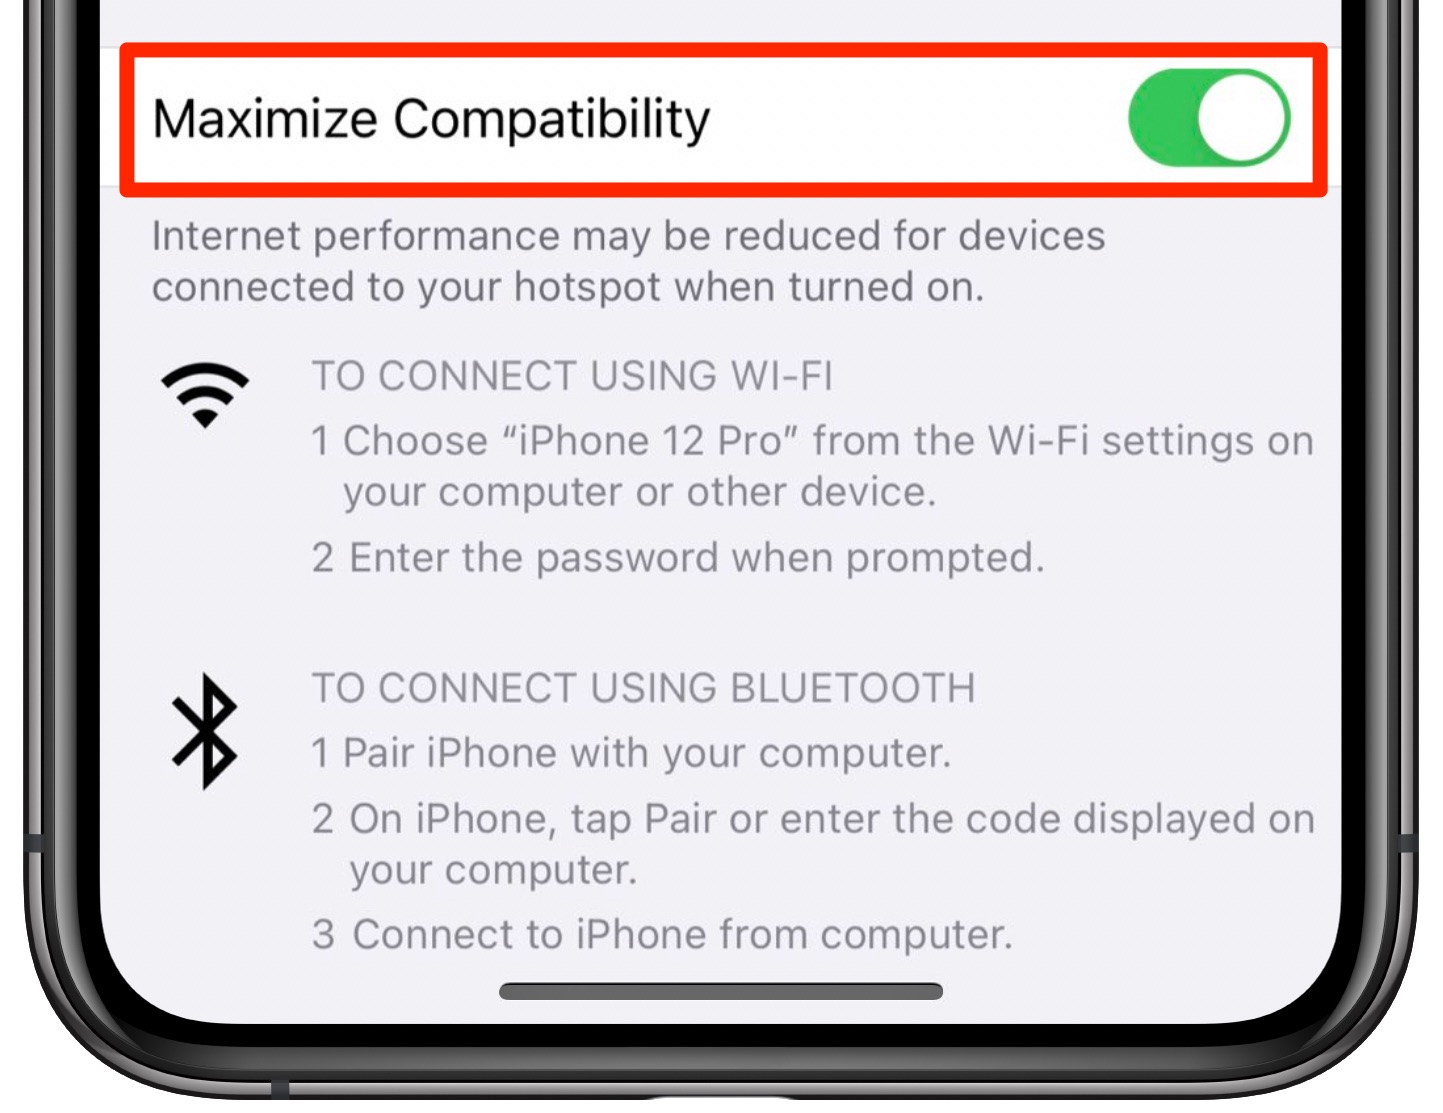 Network Switching: Changing Bands On IPhone 10